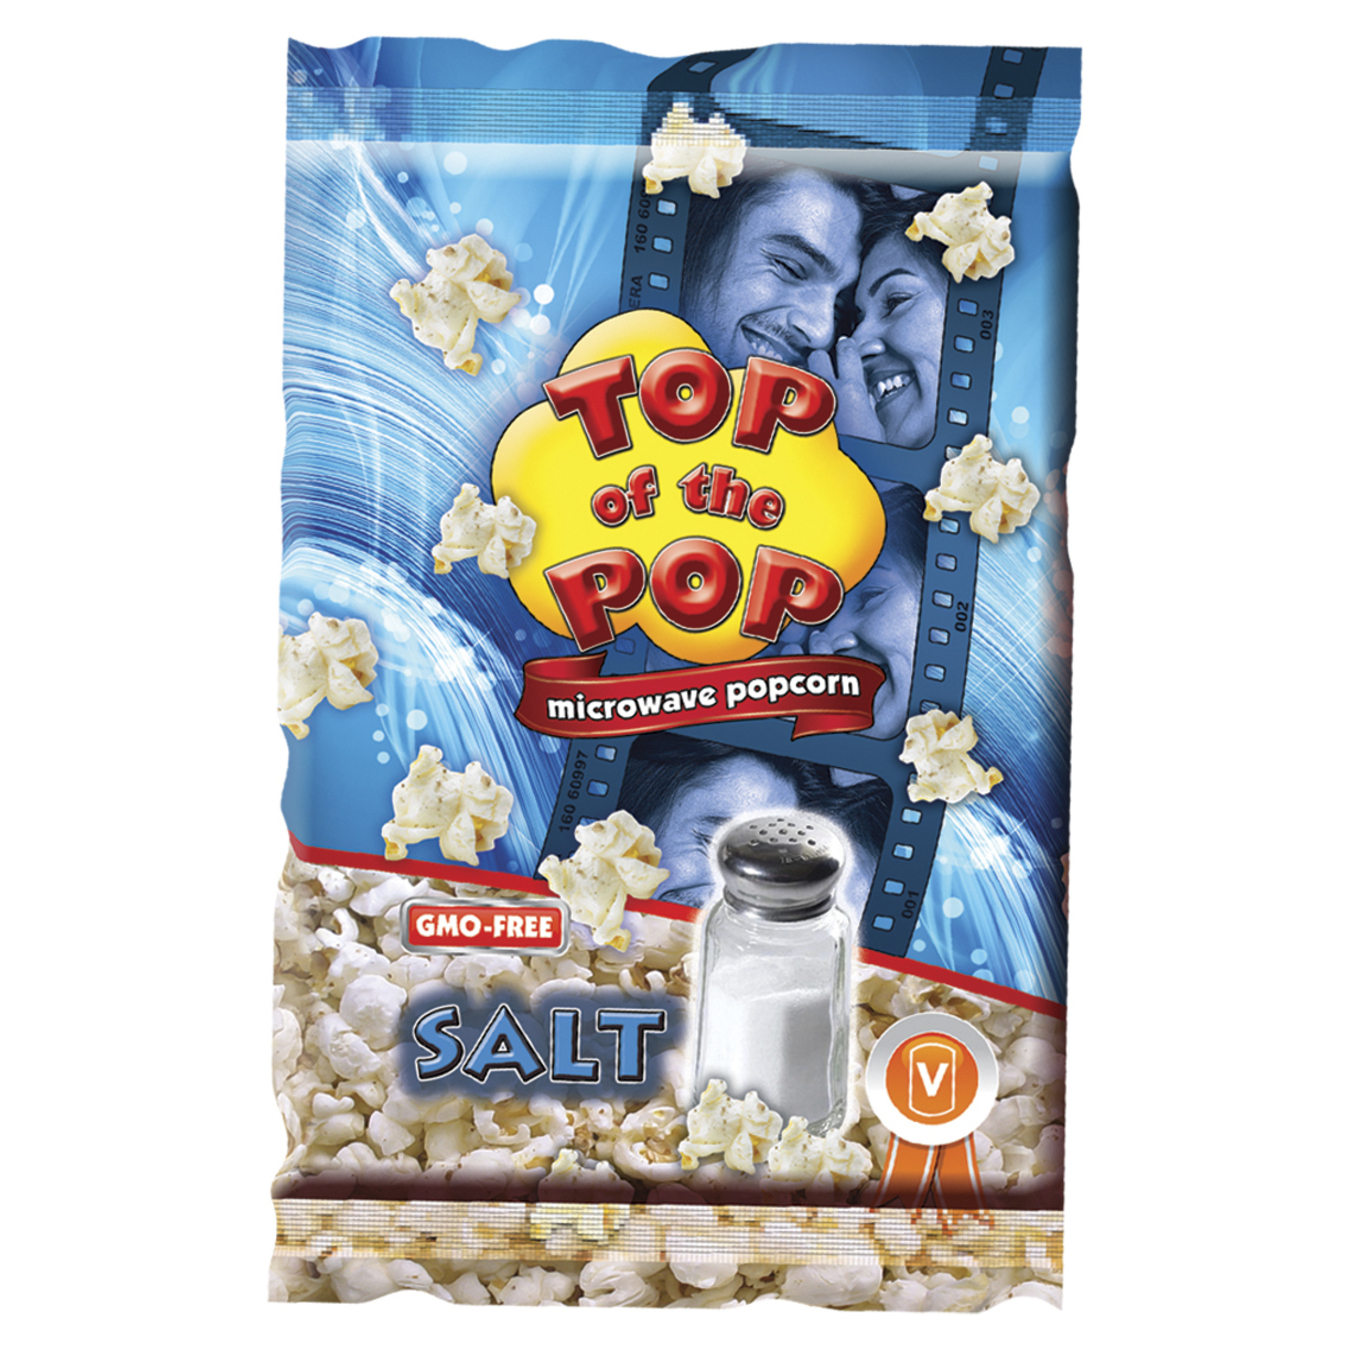 Popcorn Top of Pop for the microwave oven with the taste of salt 100g